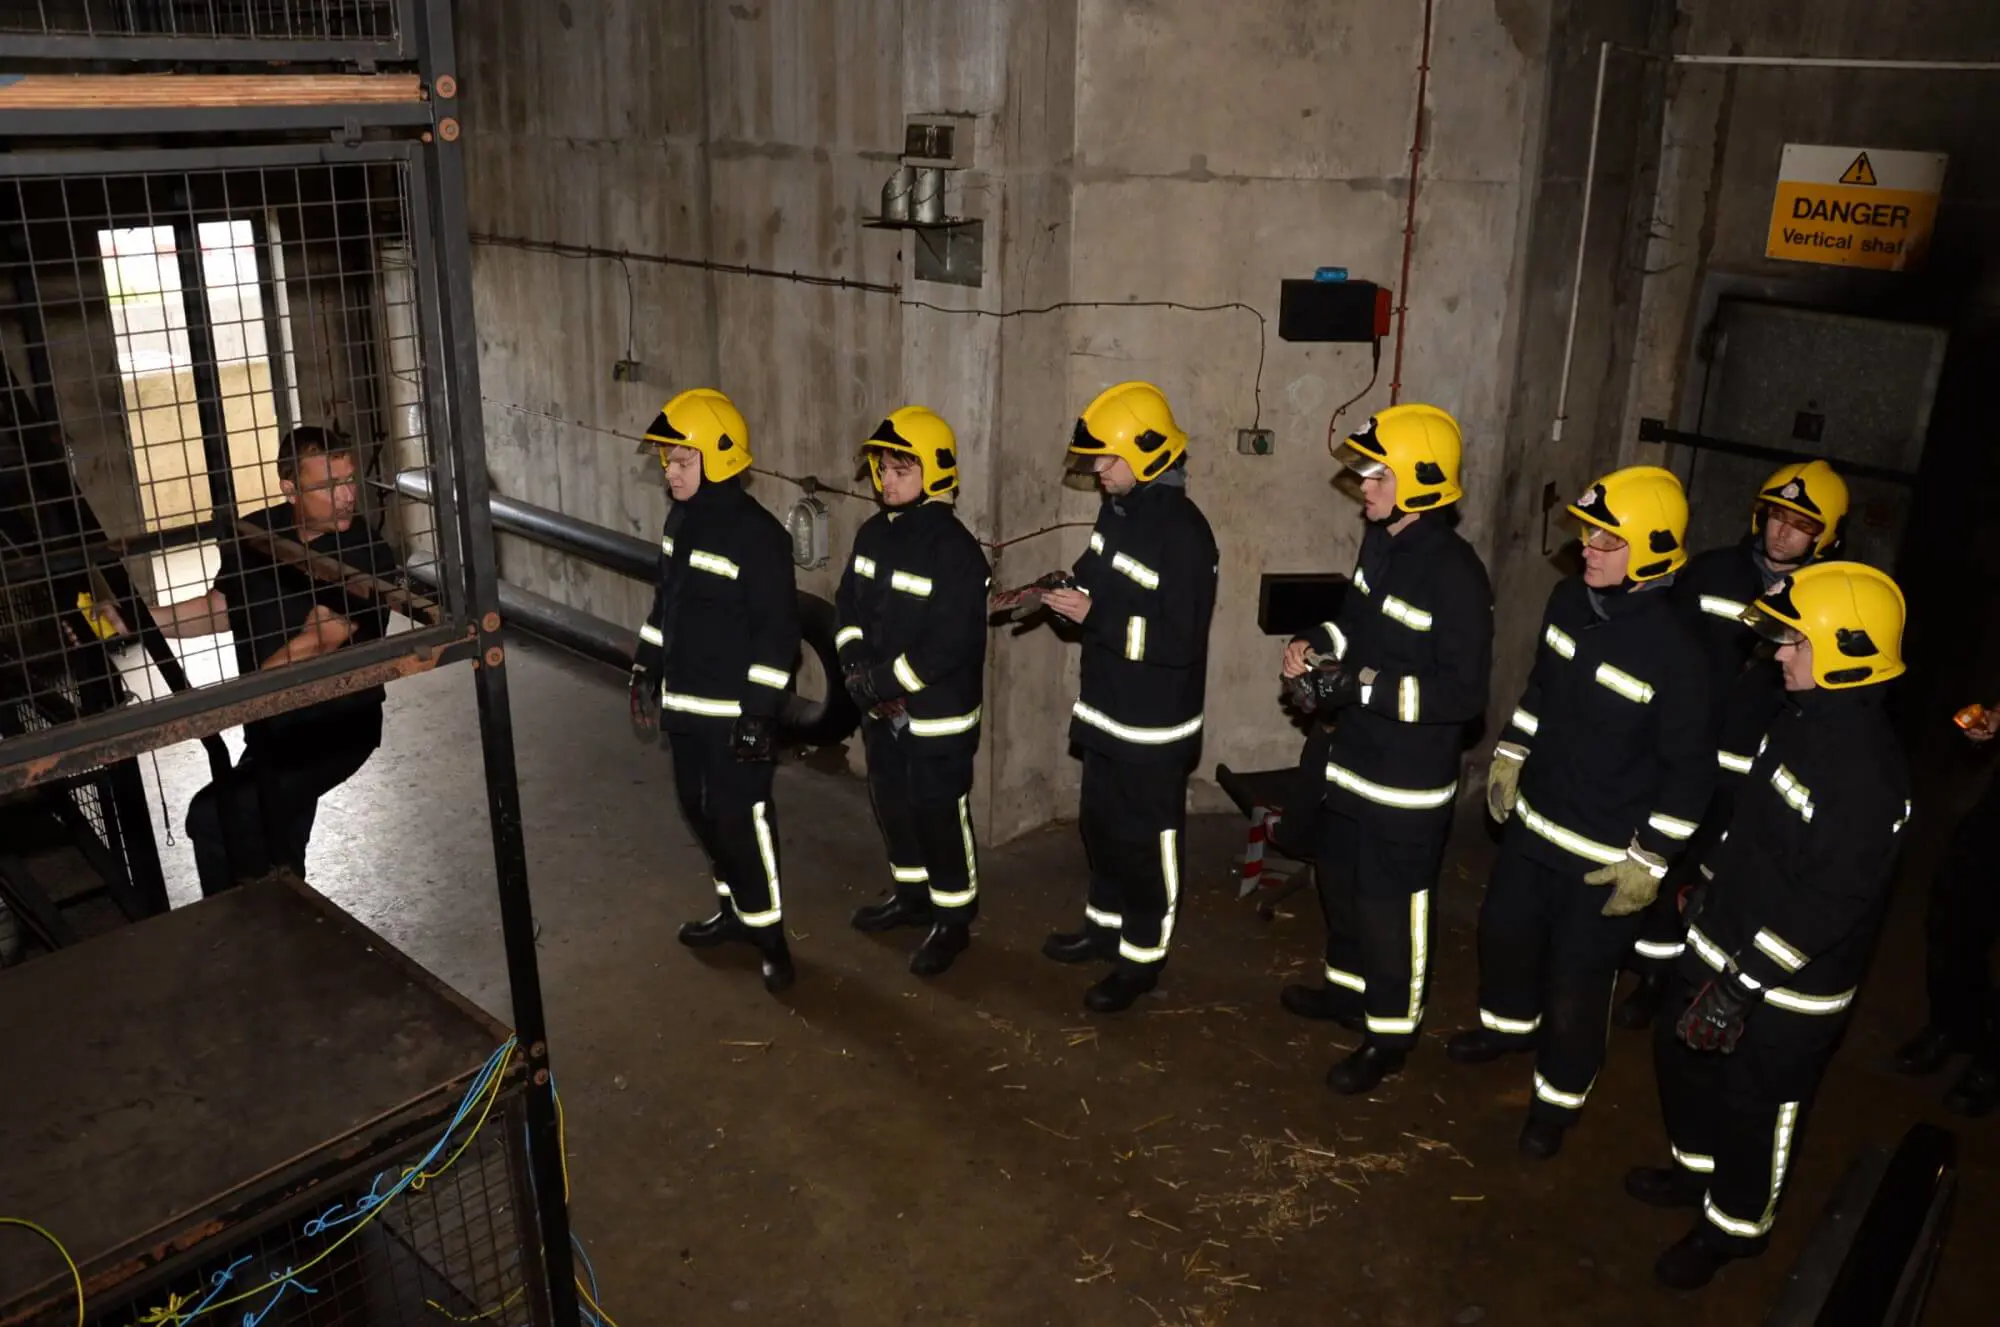 Trainee firefighters watching instructor 